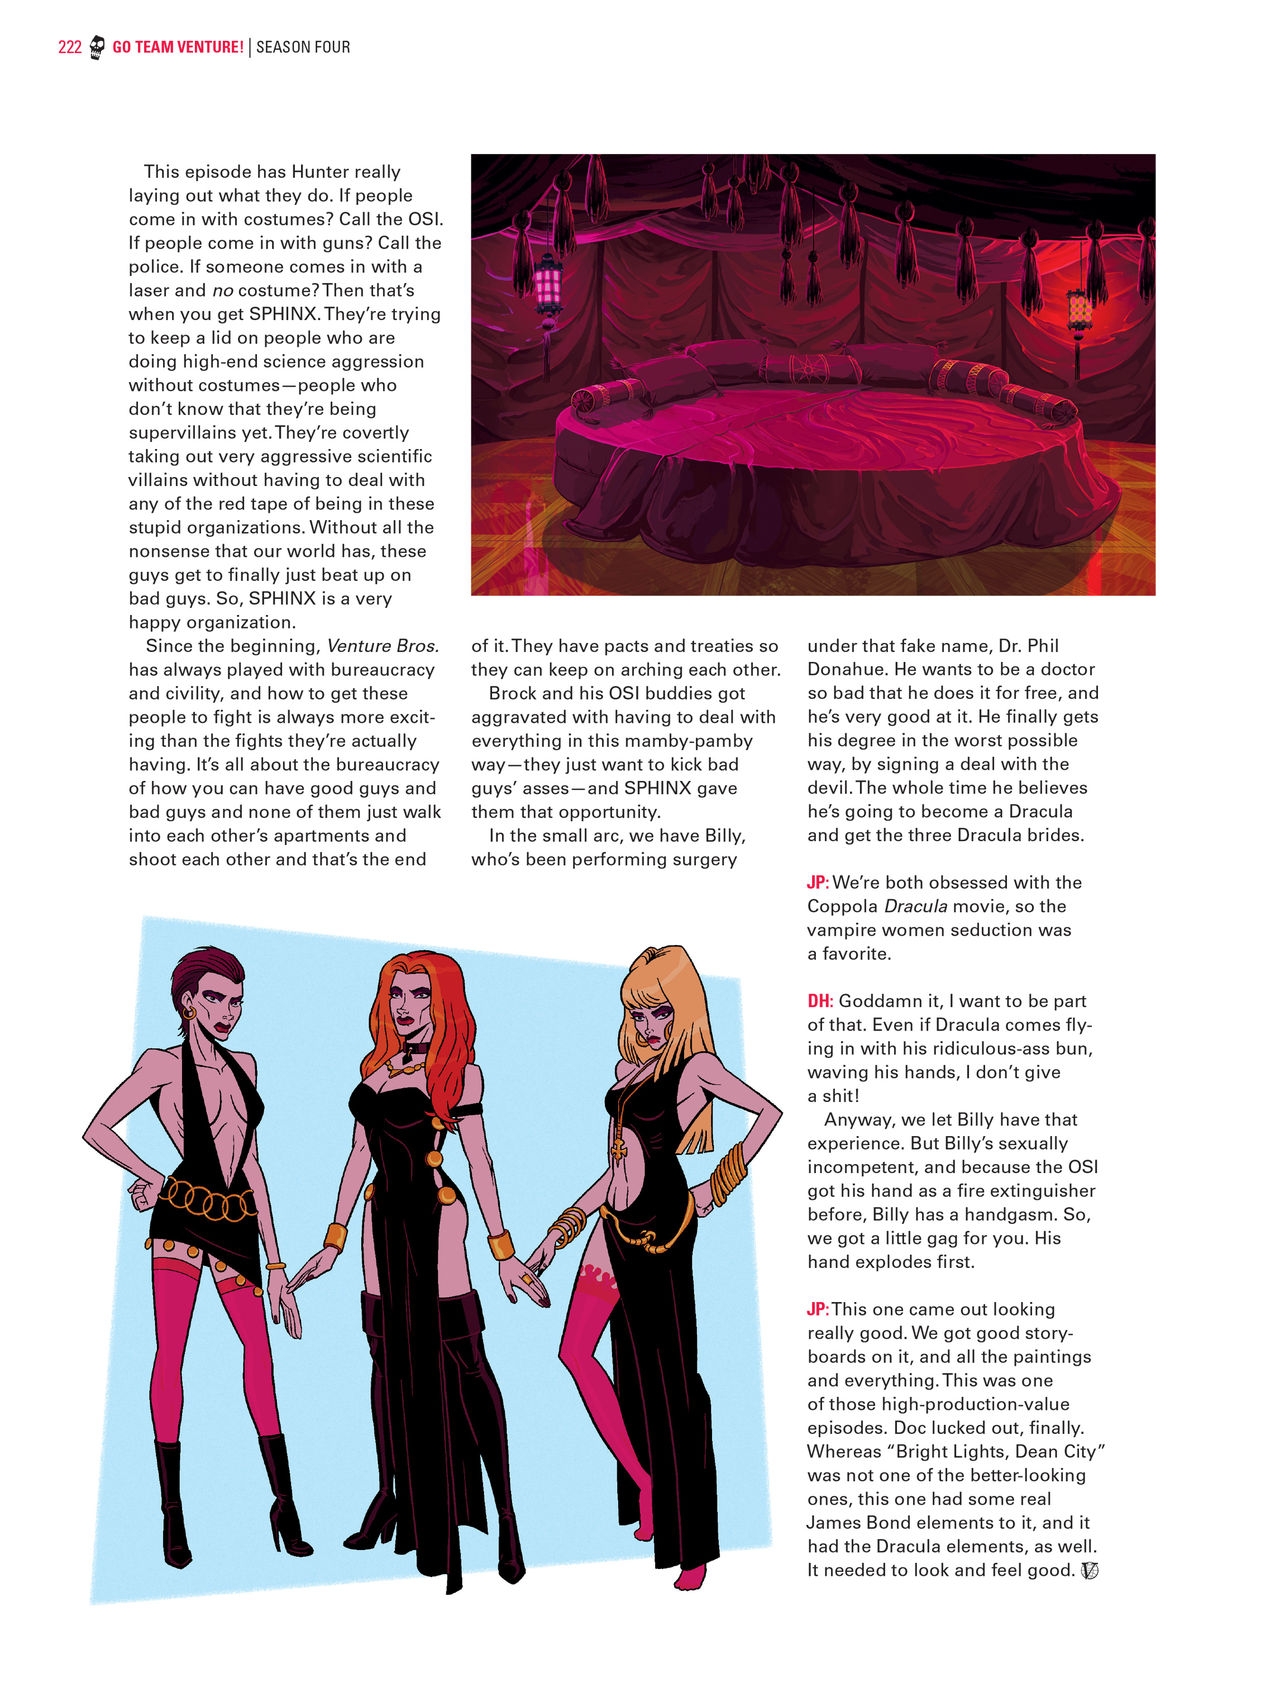 Go Team Venture! - The Art and Making of the Venture Bros 220